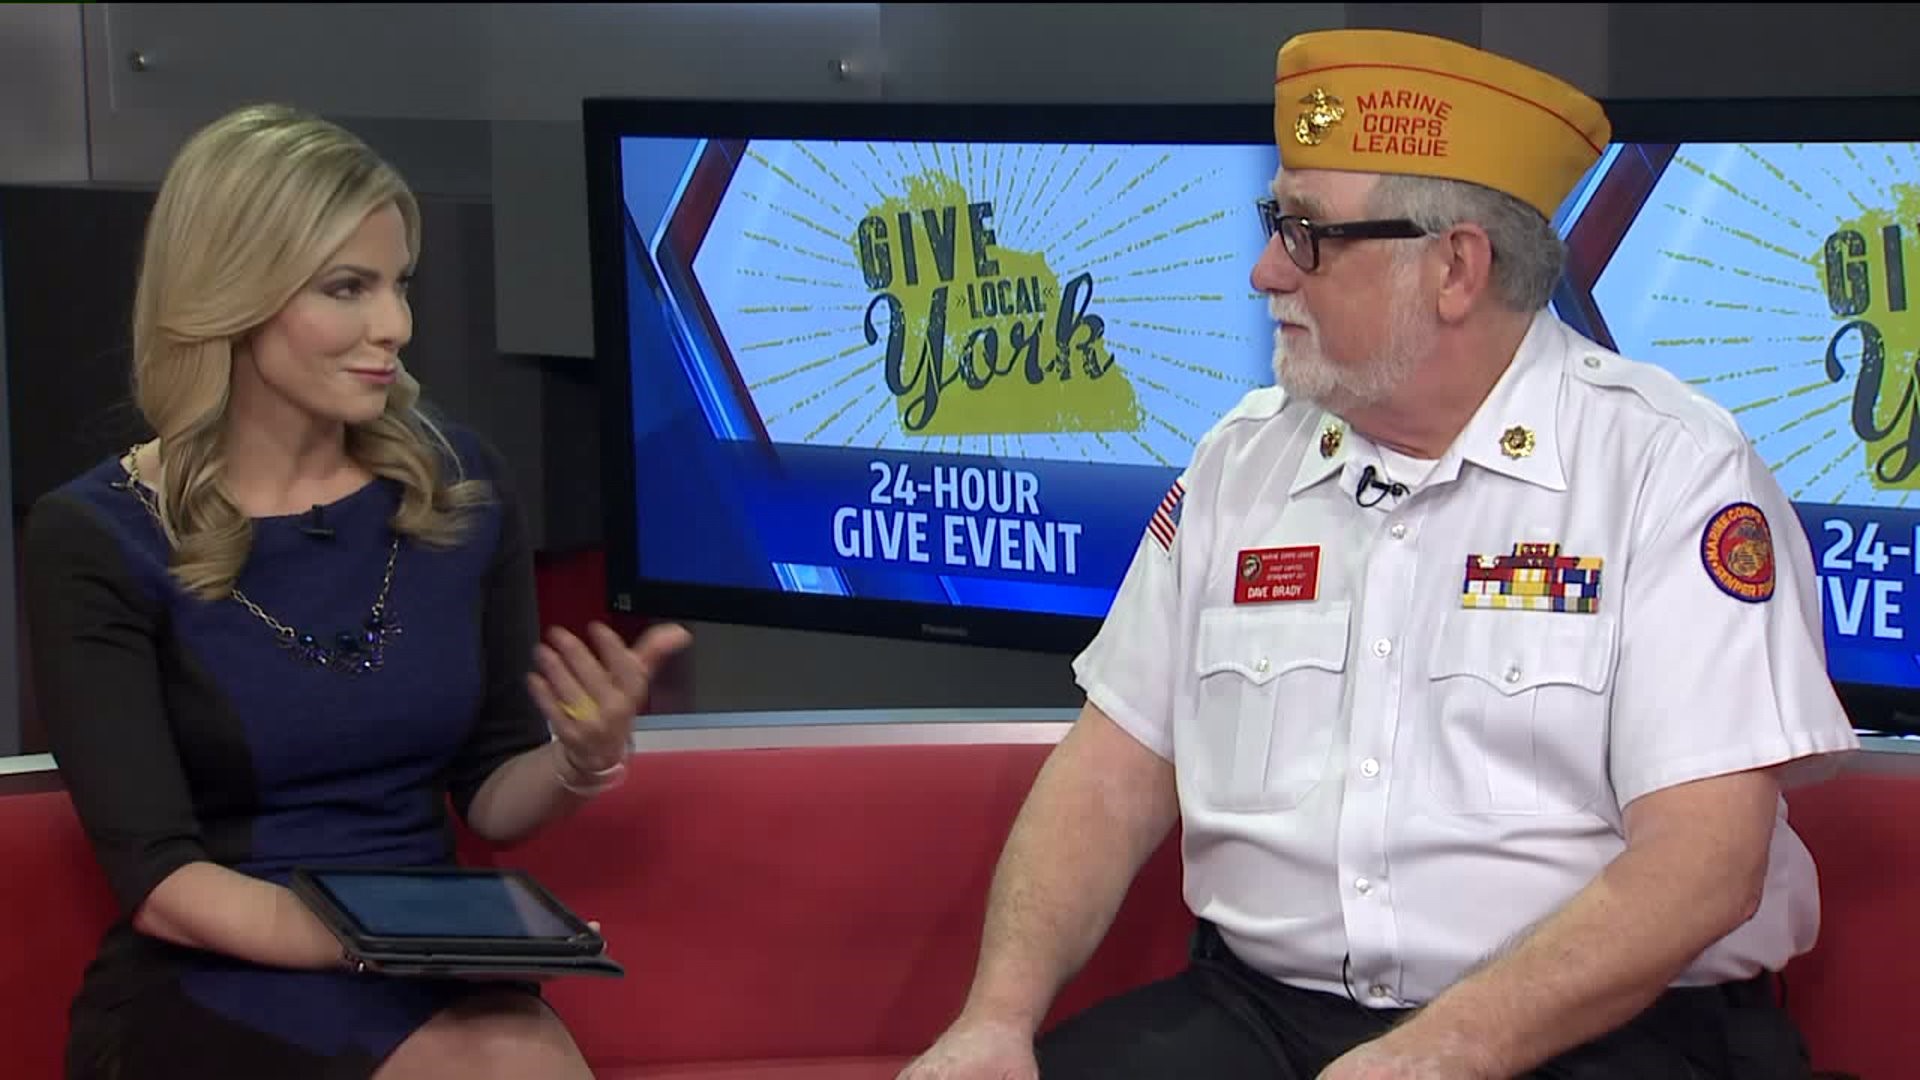 Give Local York: Toys for Tots